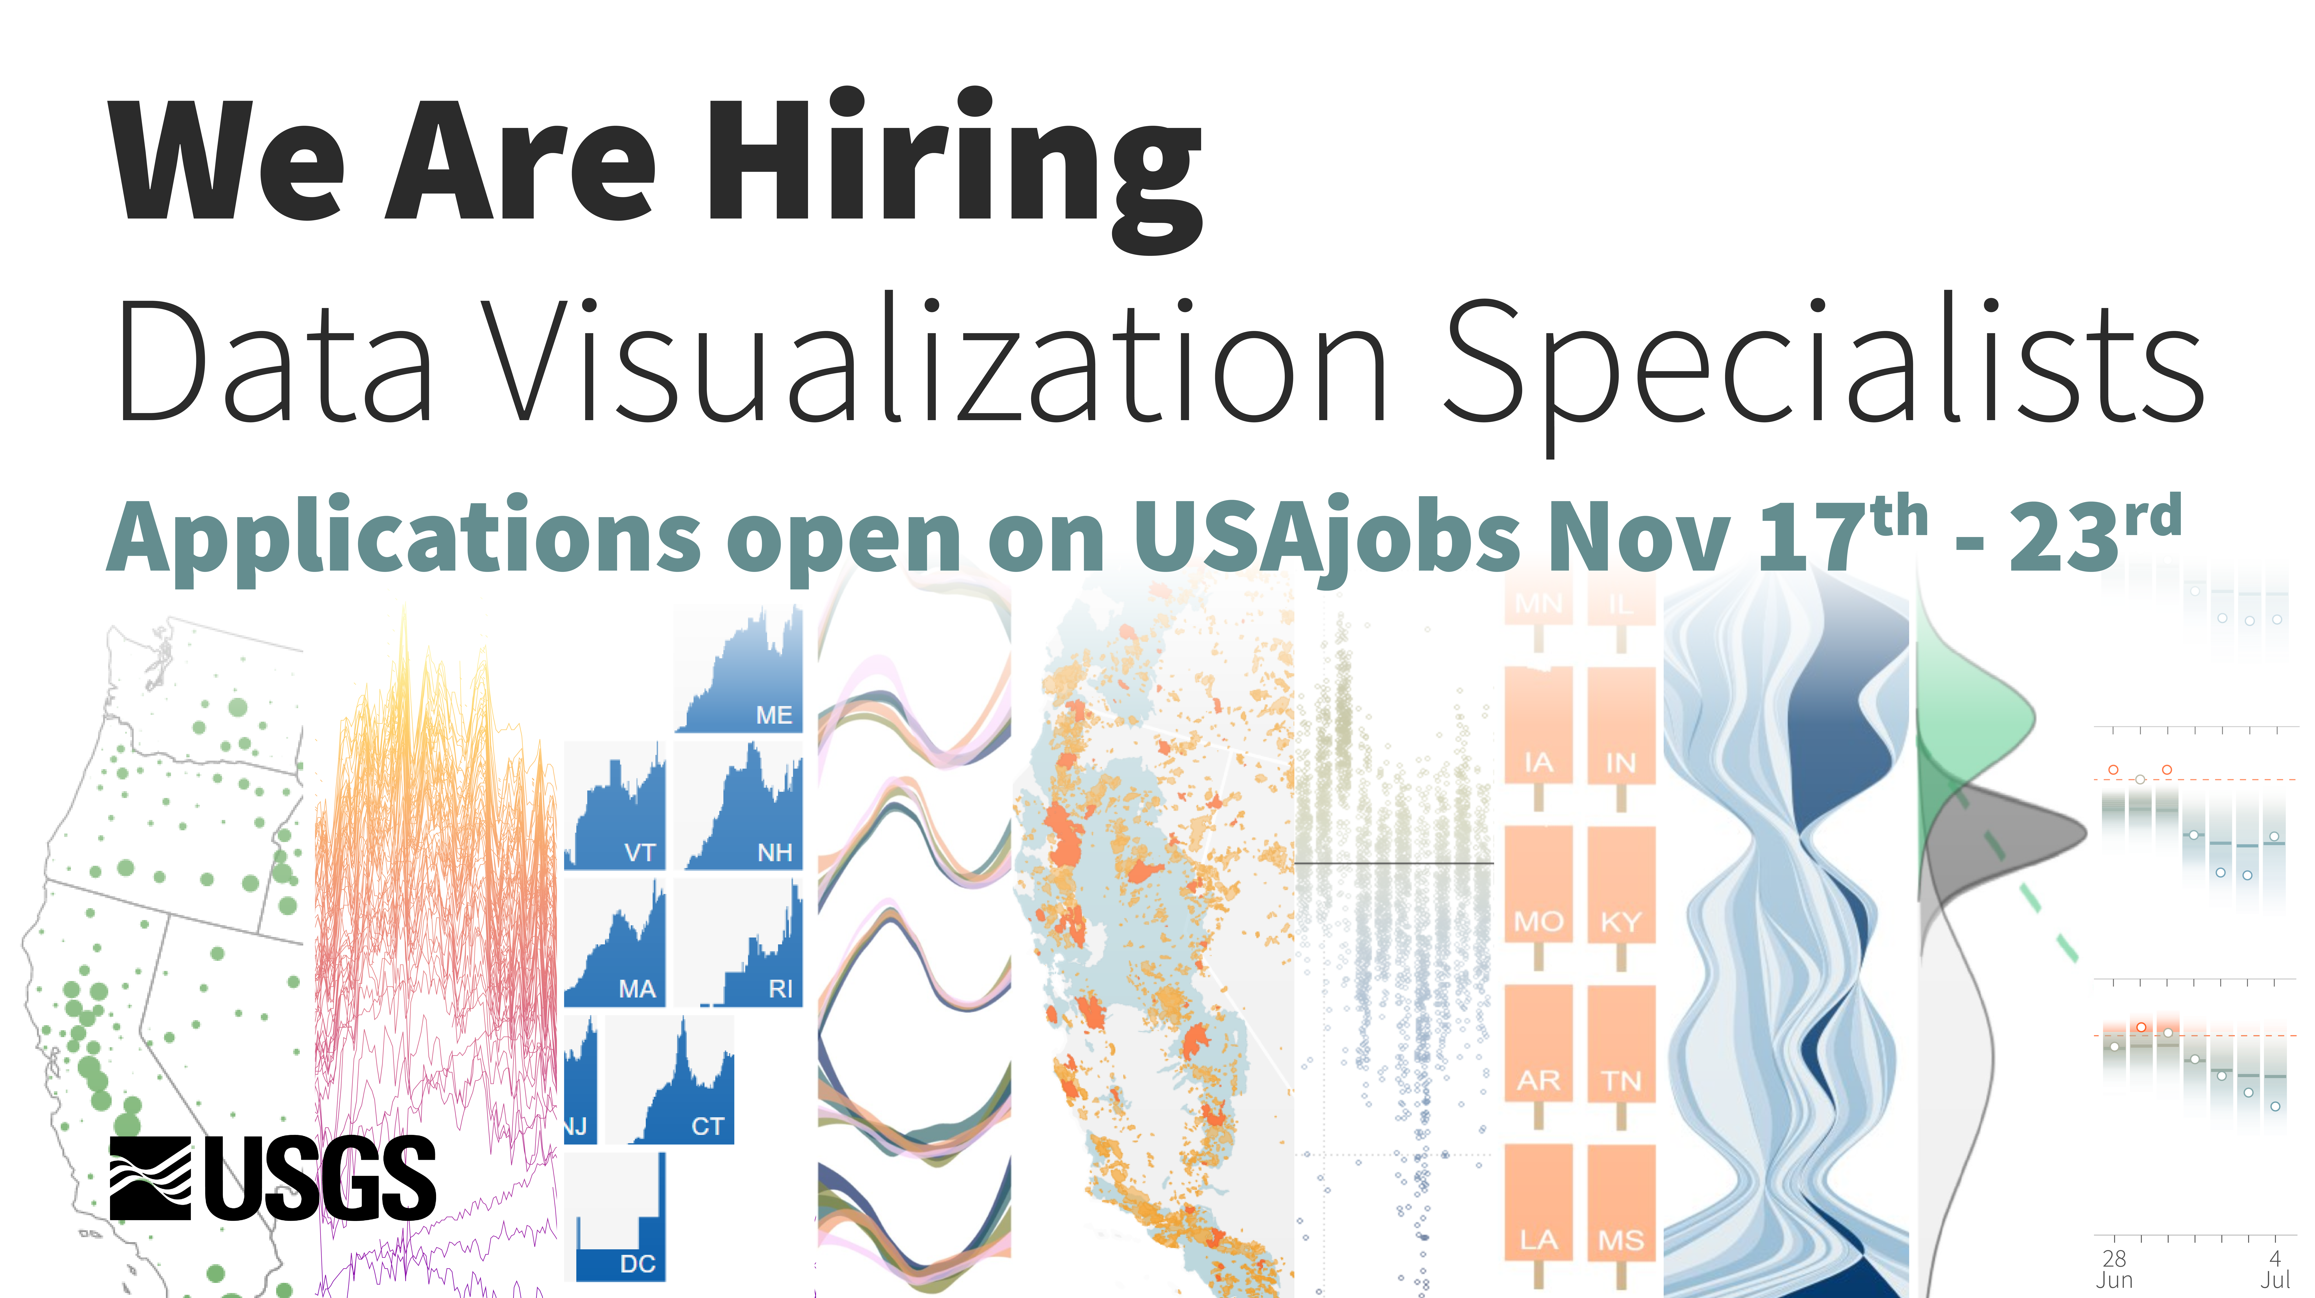 A banner announcing “We are hiring data visualization specialists. Applications will be open on USAjobs Nov 17th-23rd “.  A collection of images shows different chart and map data visualizations from USGS.